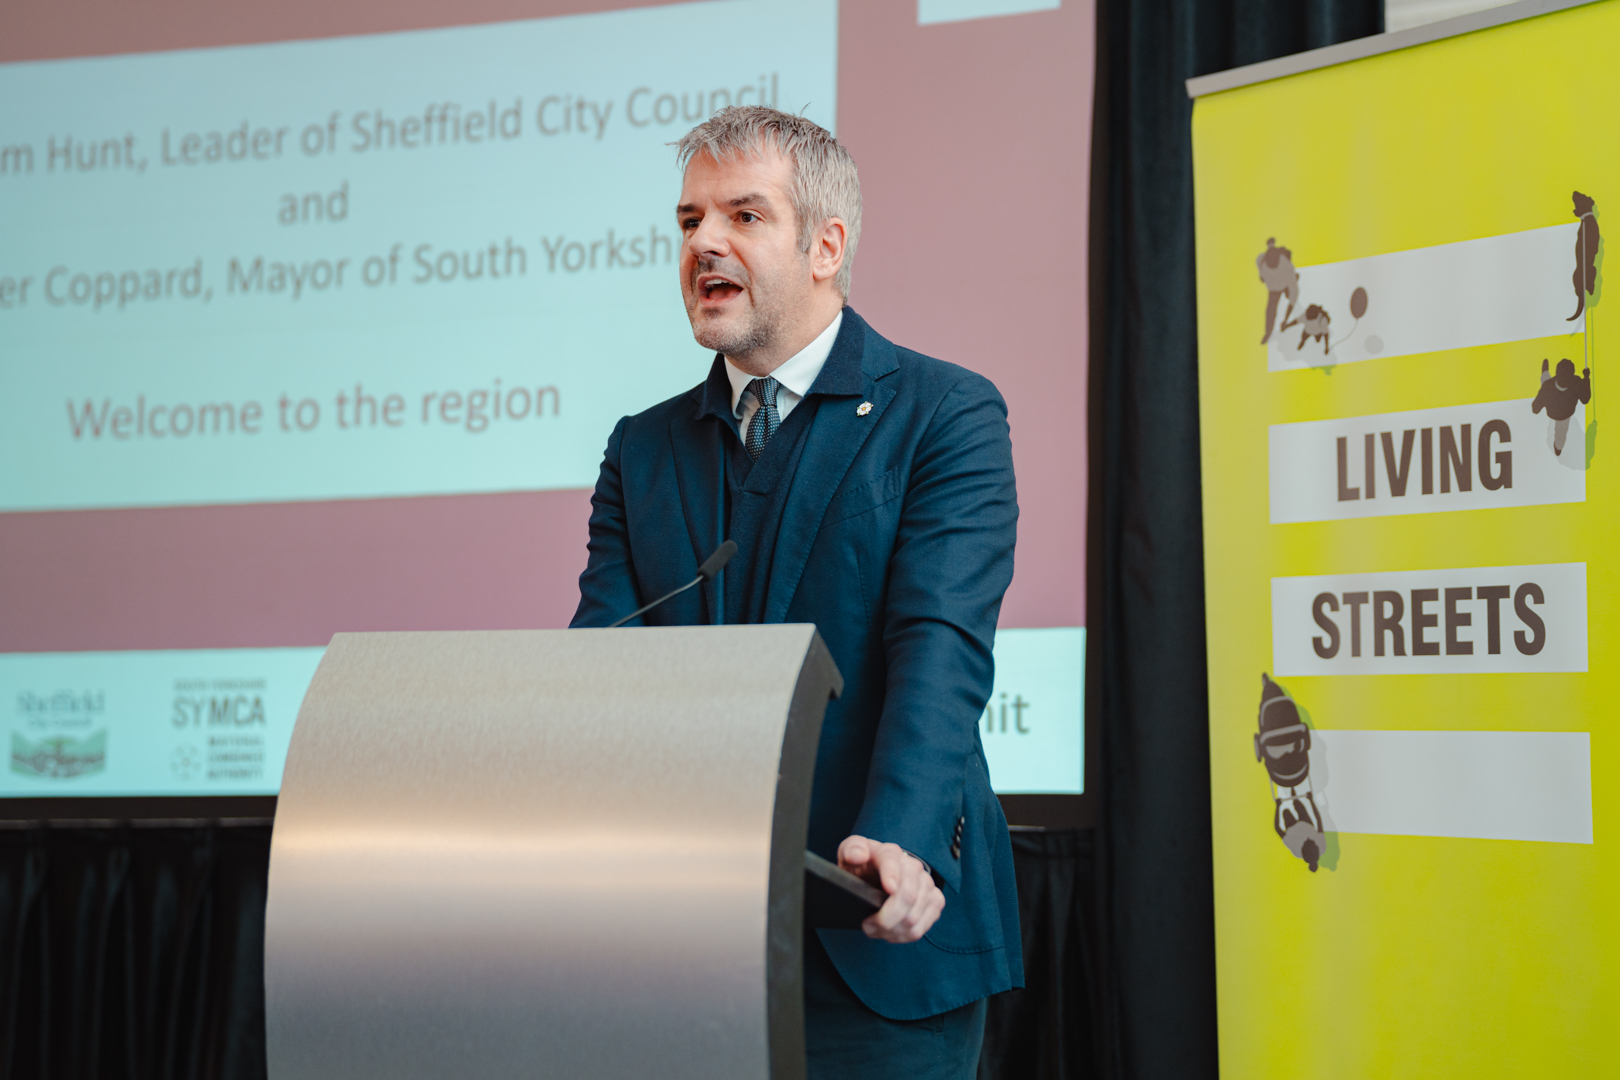 Mayor of South Yorkshire, Oliver Coppard presents